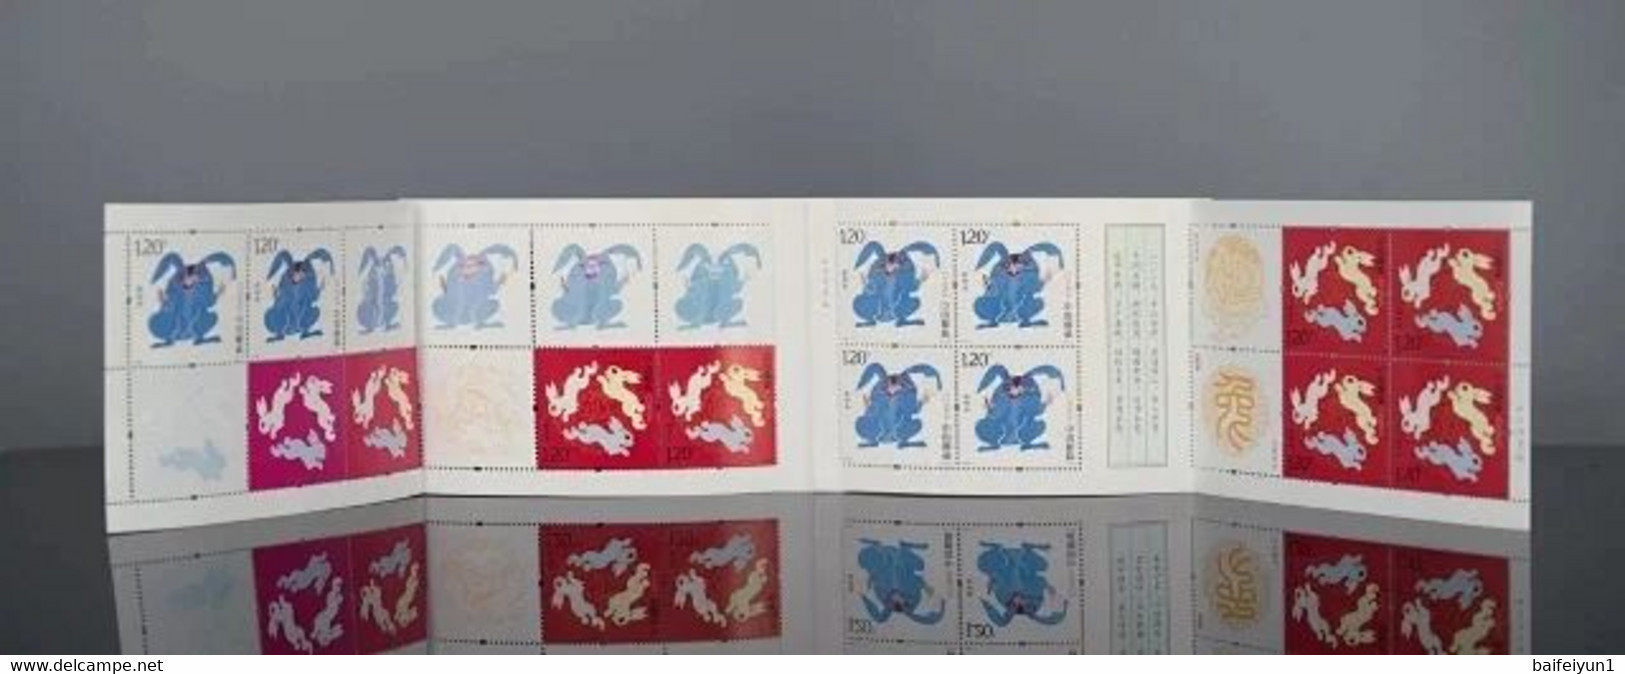 CHINA 2023-1 China New Year Zodiac Of Rabbit Stamp Booklet(Hologram Cover) - Hologramme